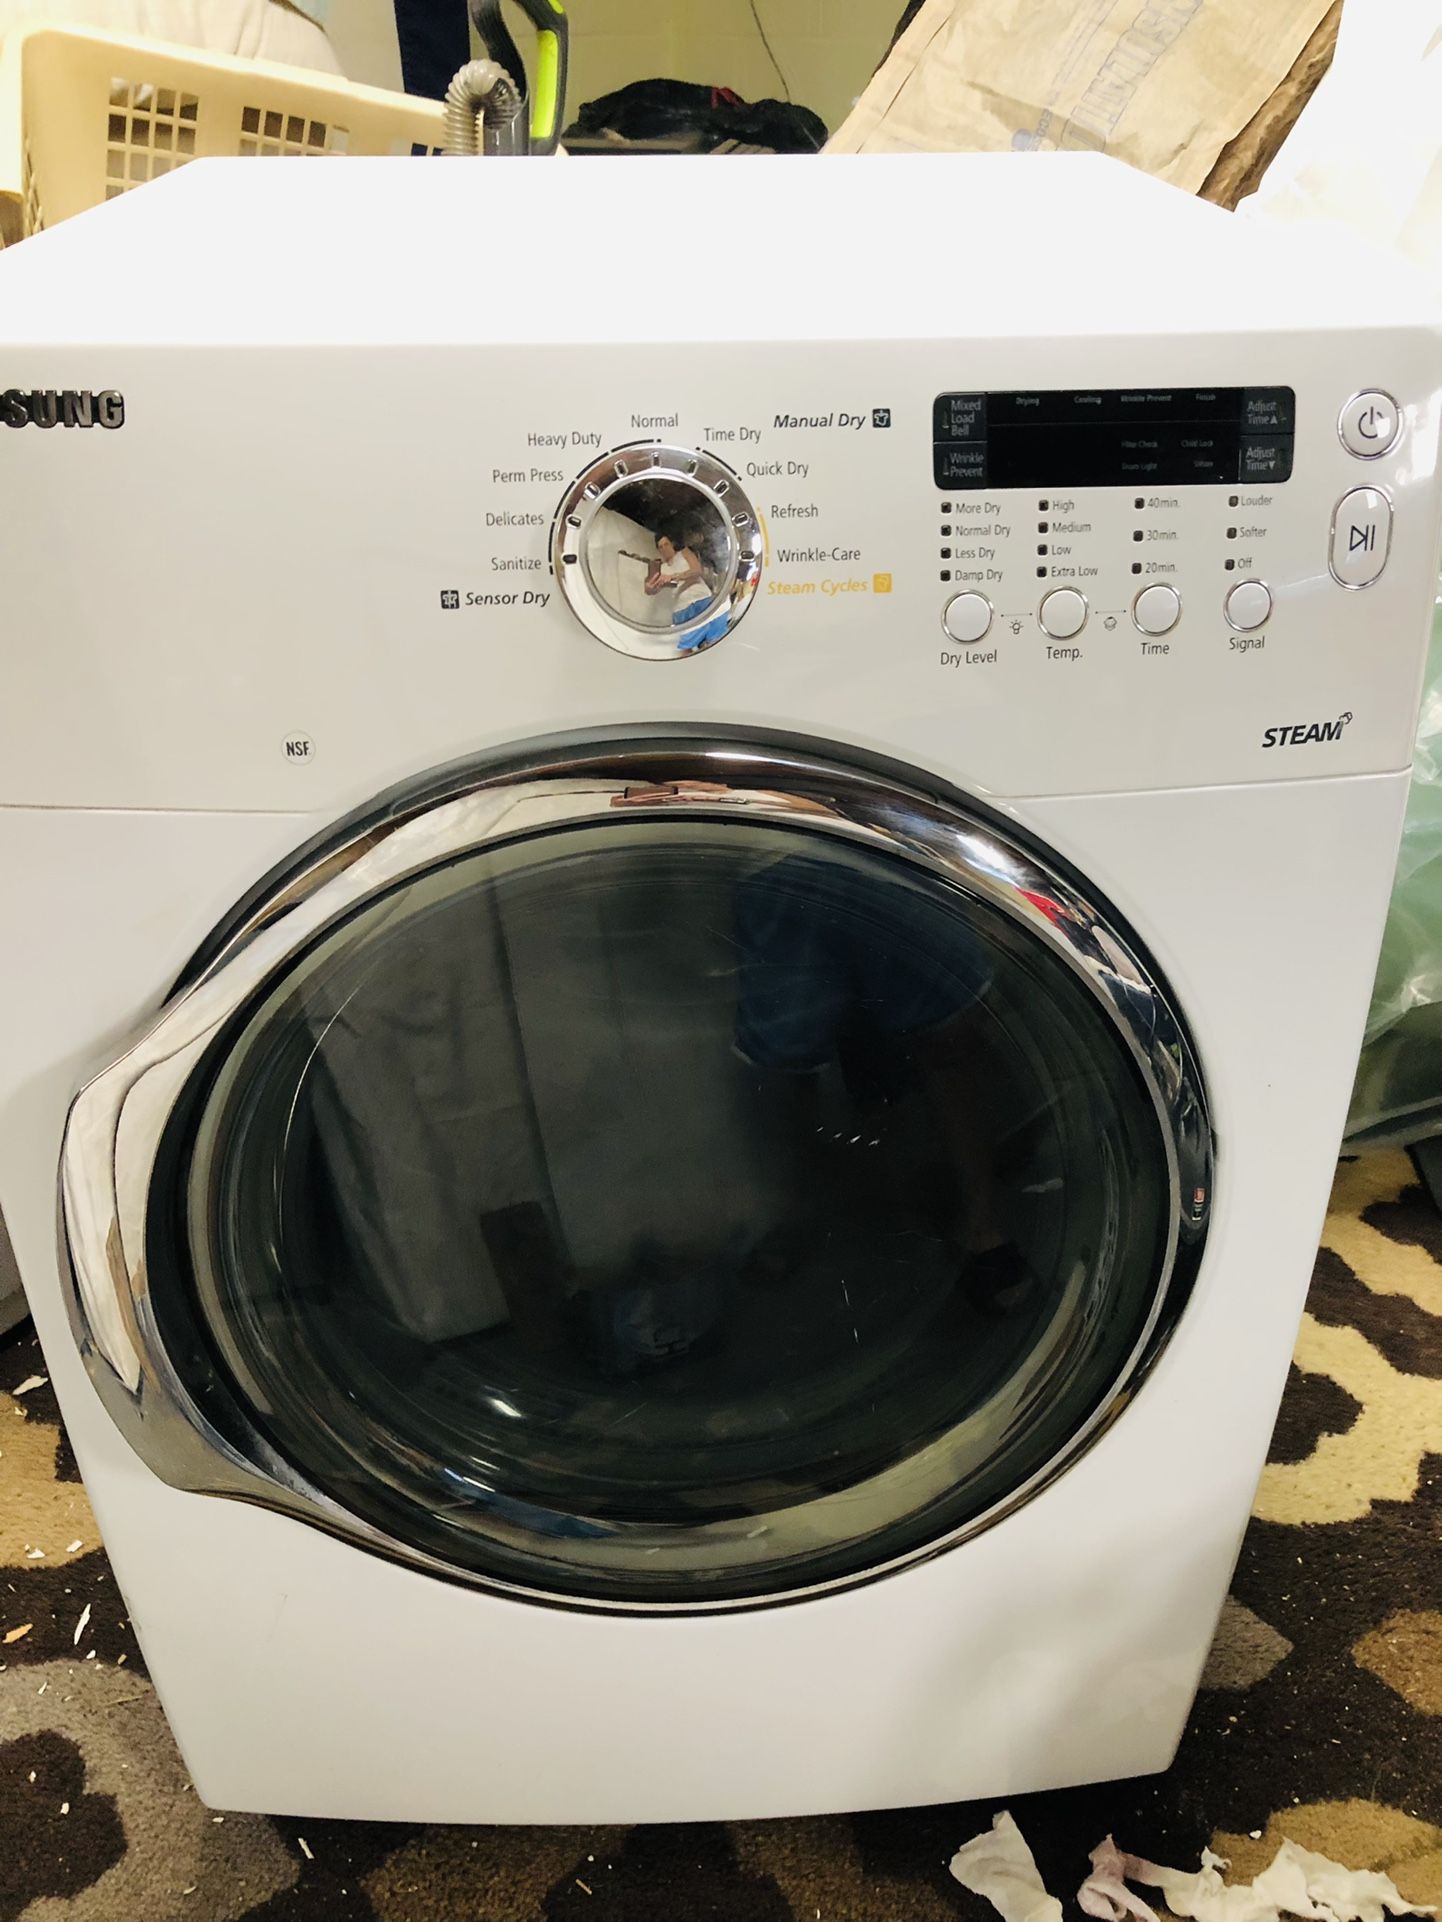 Dryer Electric Samsung With The Steam Option